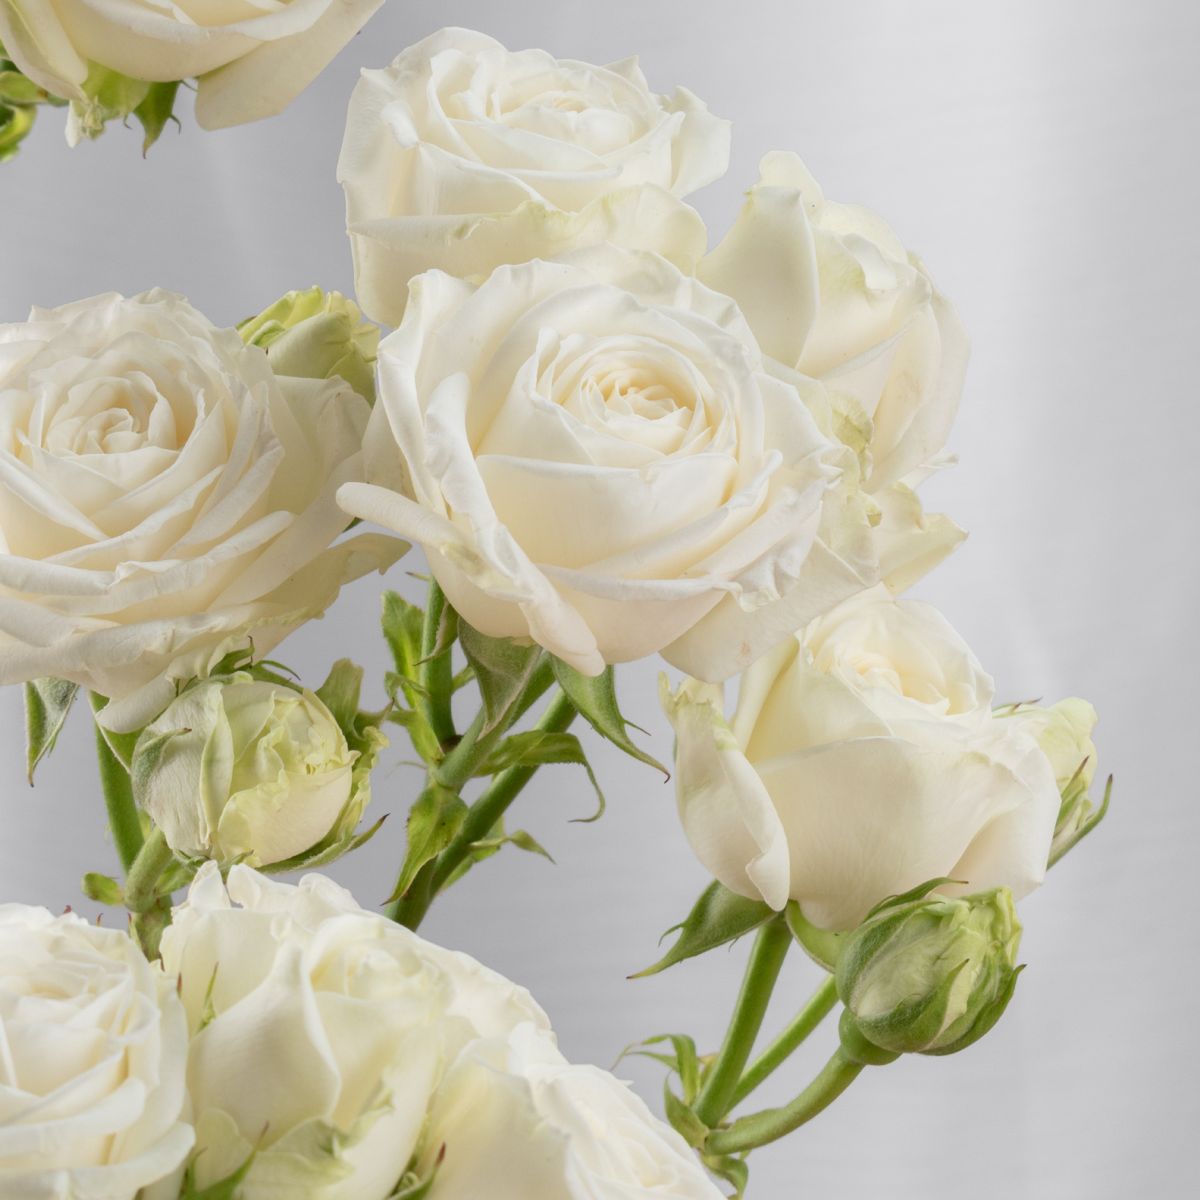 Spray roses are among florists favorites